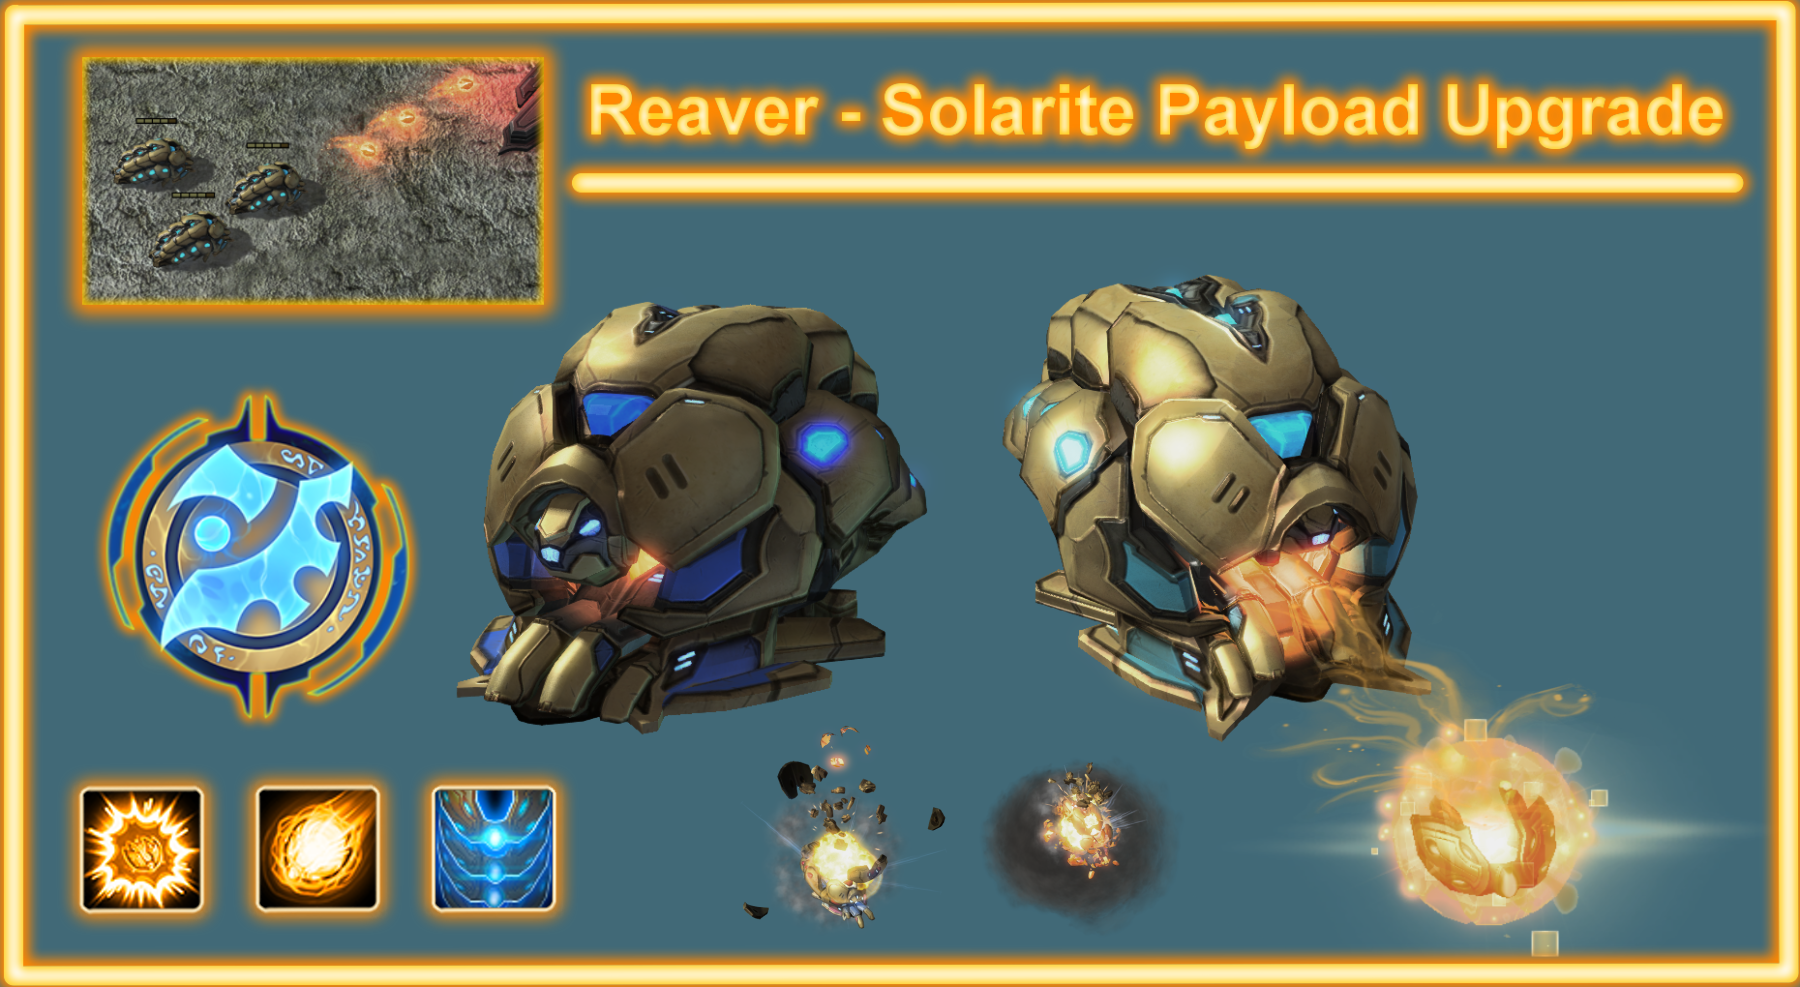 Reaver - Solarite Payload Upgrade